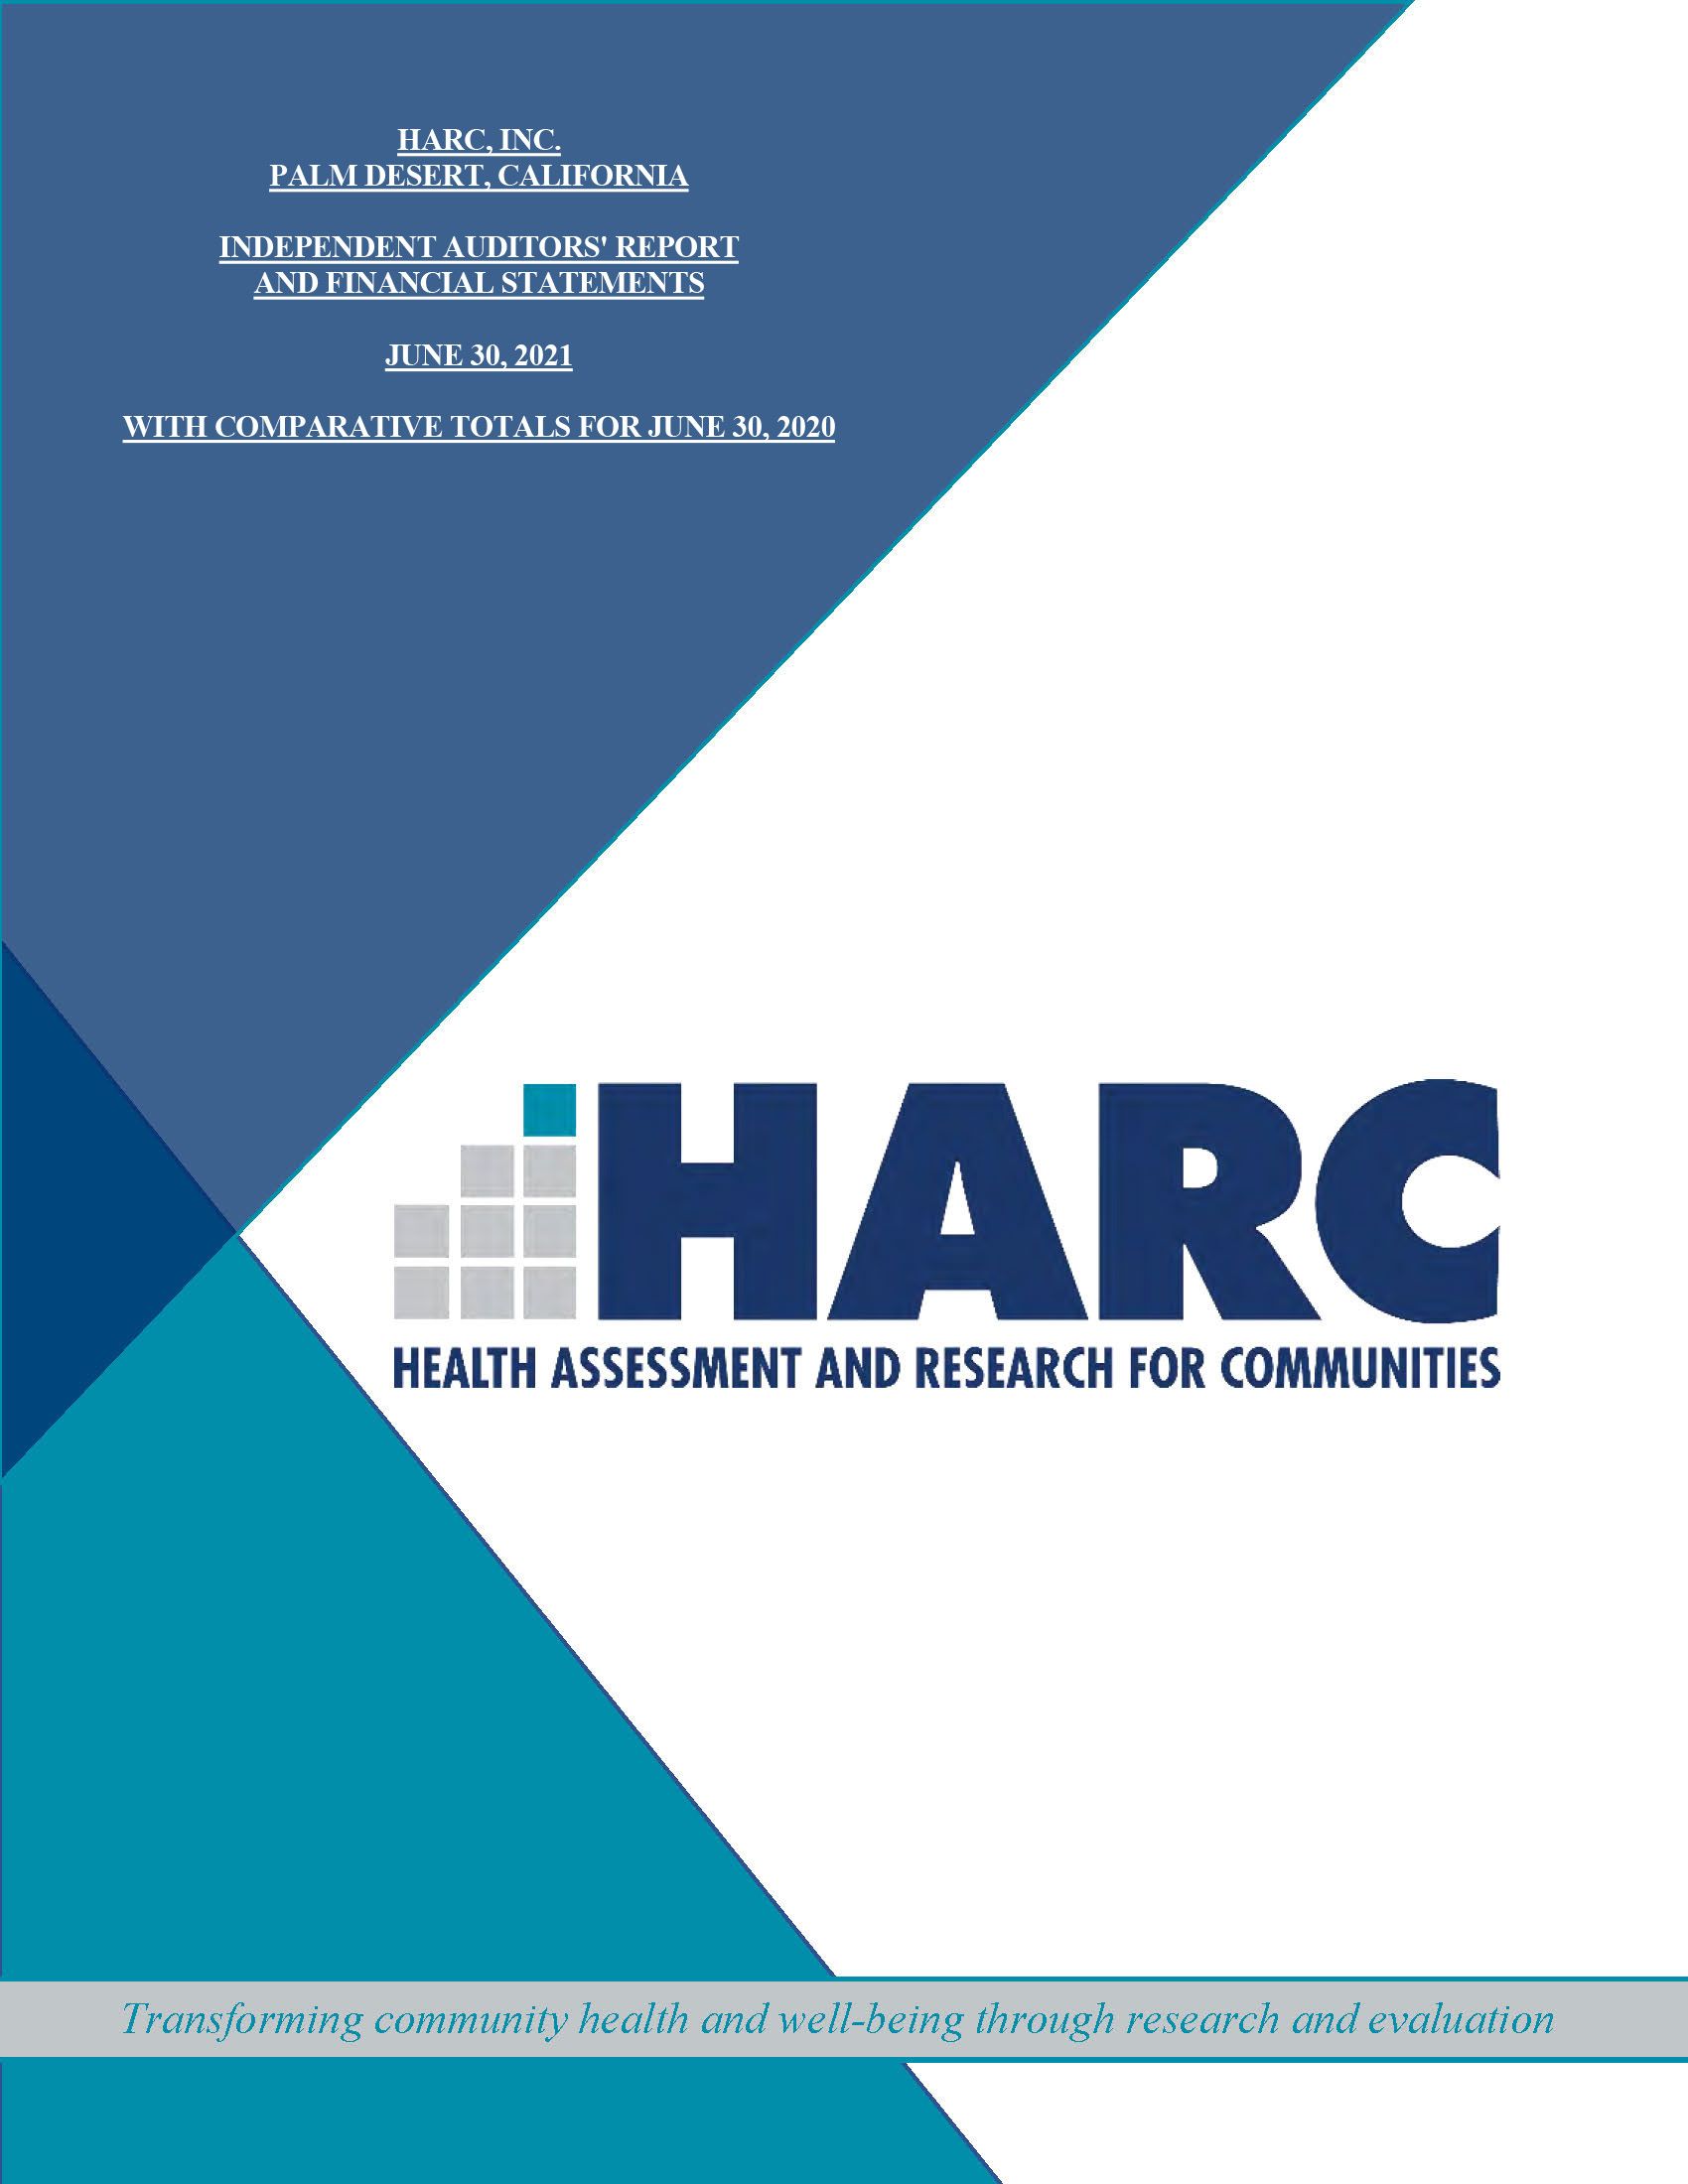 HARC, INC.
PALM DESERT, CALIFORNIA
INDEPENDENT AUDITORS' REPORT
AND FINANCIAL STATEMENTS
JUNE 30, 2021
WITH COMPARATIVE TOTALS FOR JUNE 30, 2020